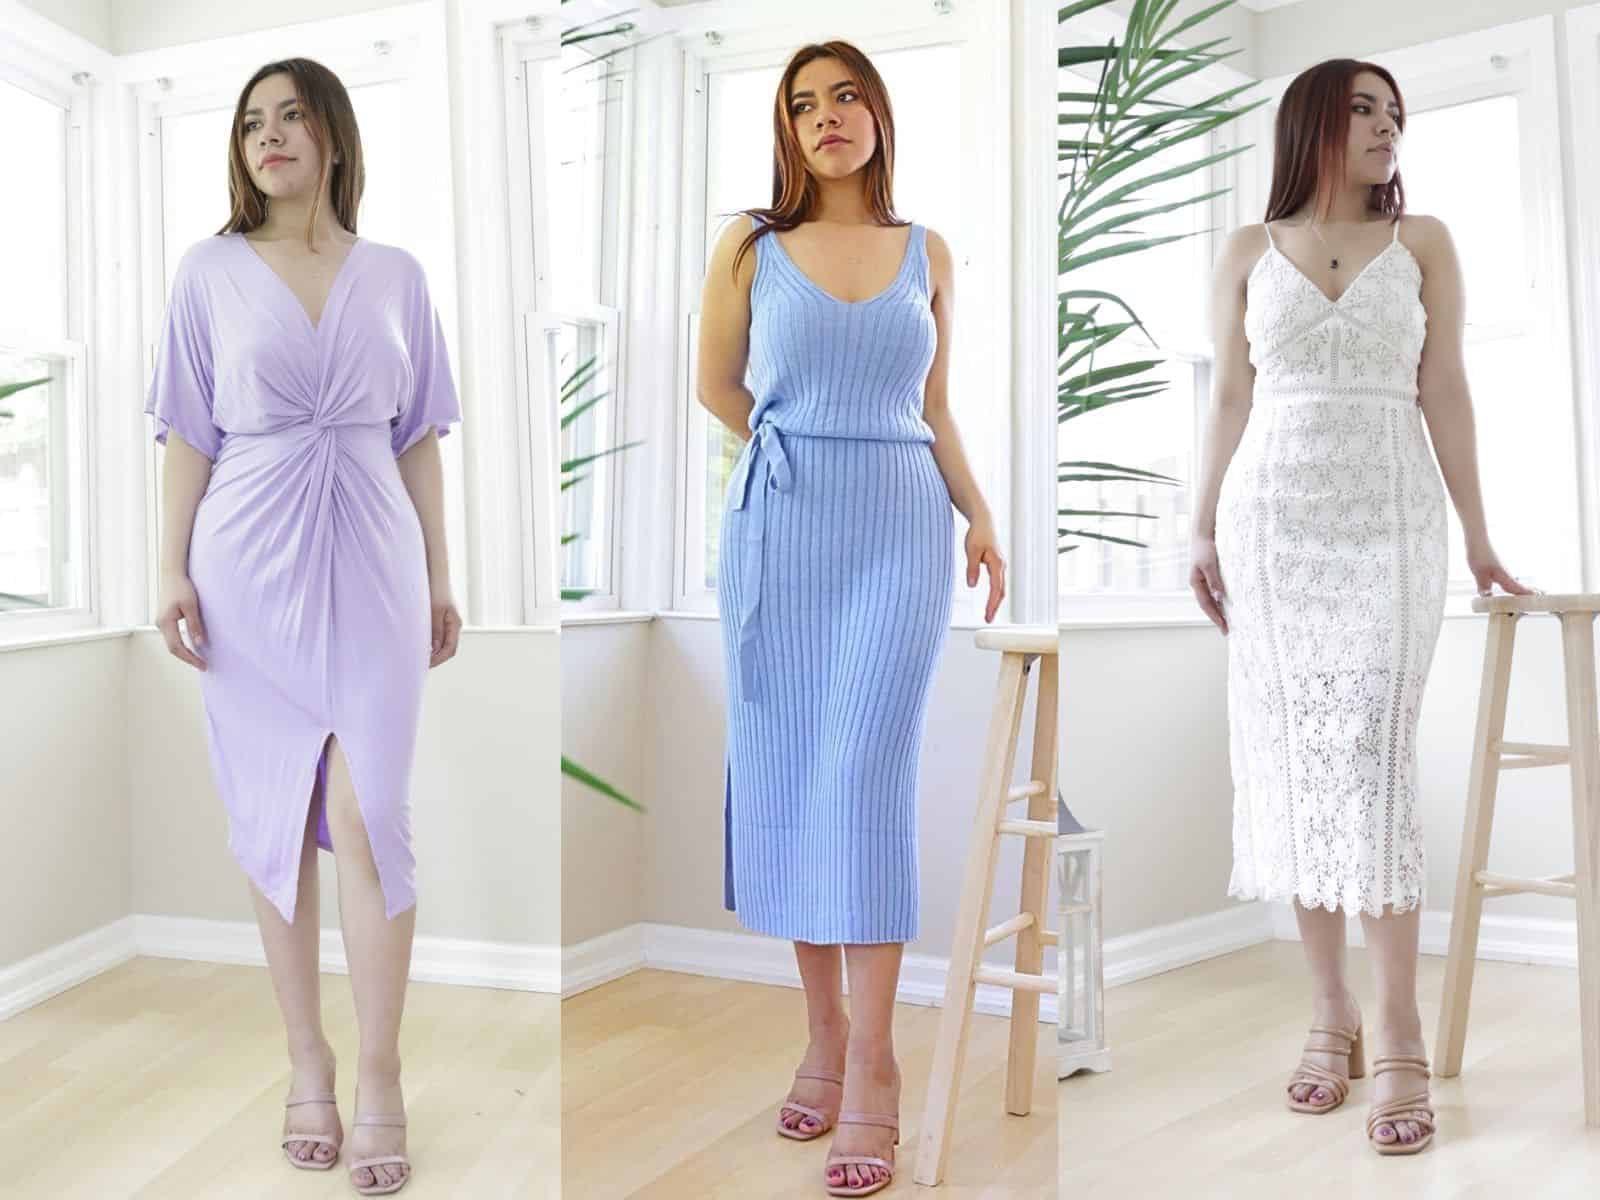 I'm 5'2, here's 19 Best Ways to Dress if You are Petite with Large Chest - Petite  Dressing